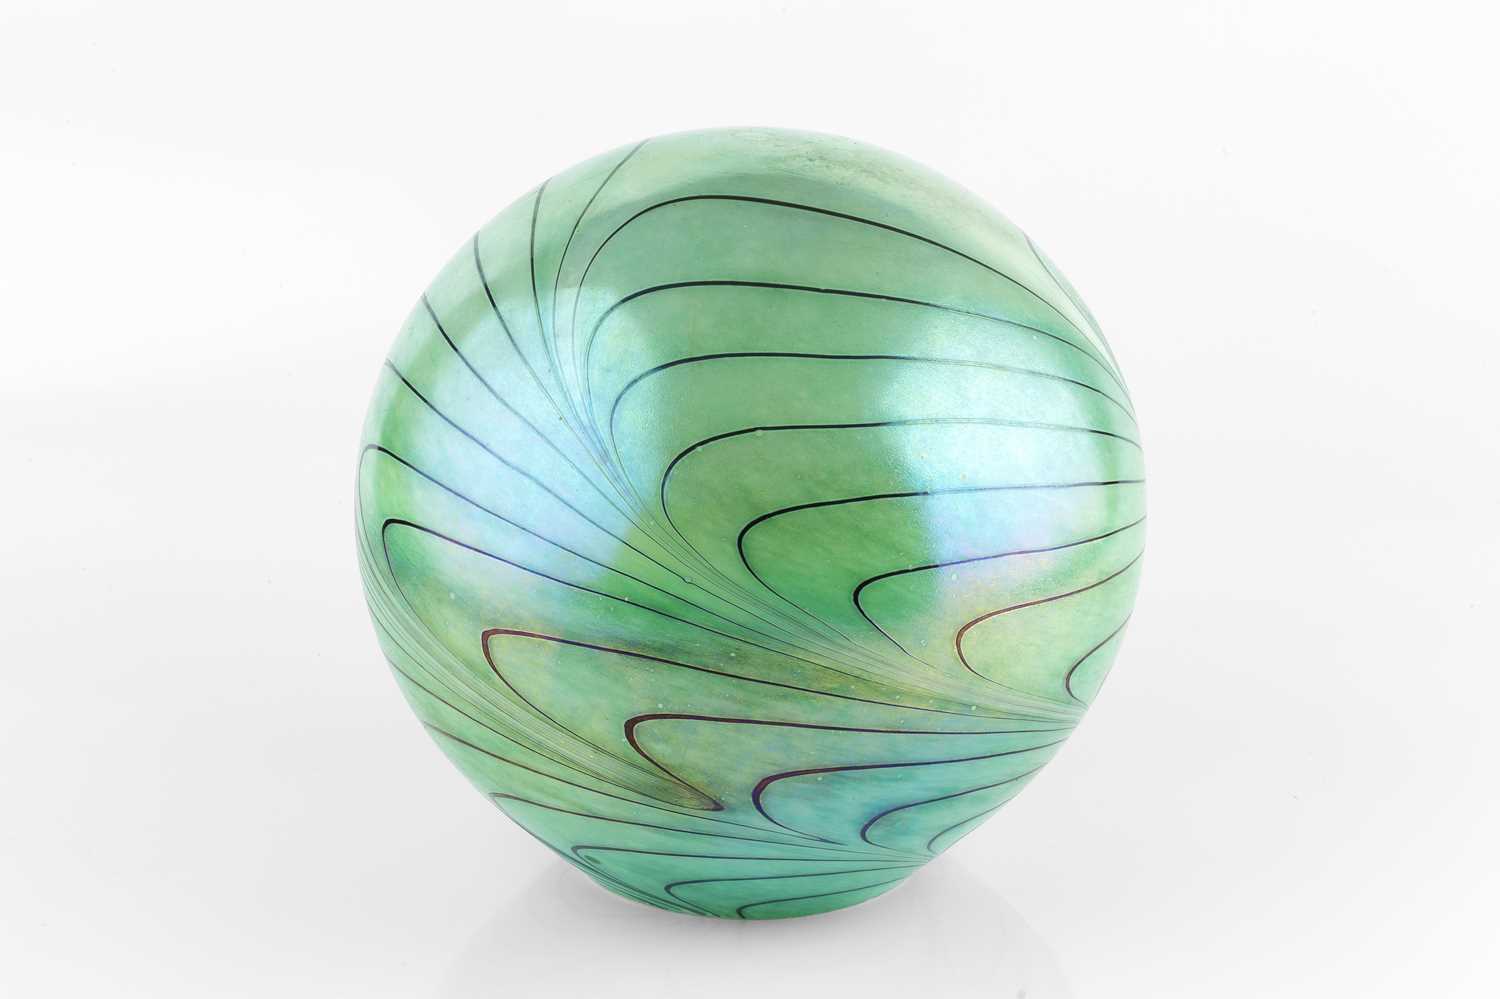 Lino Tagliapietra (b.1934) Art glass table lamp swirled green and white glass with black lines